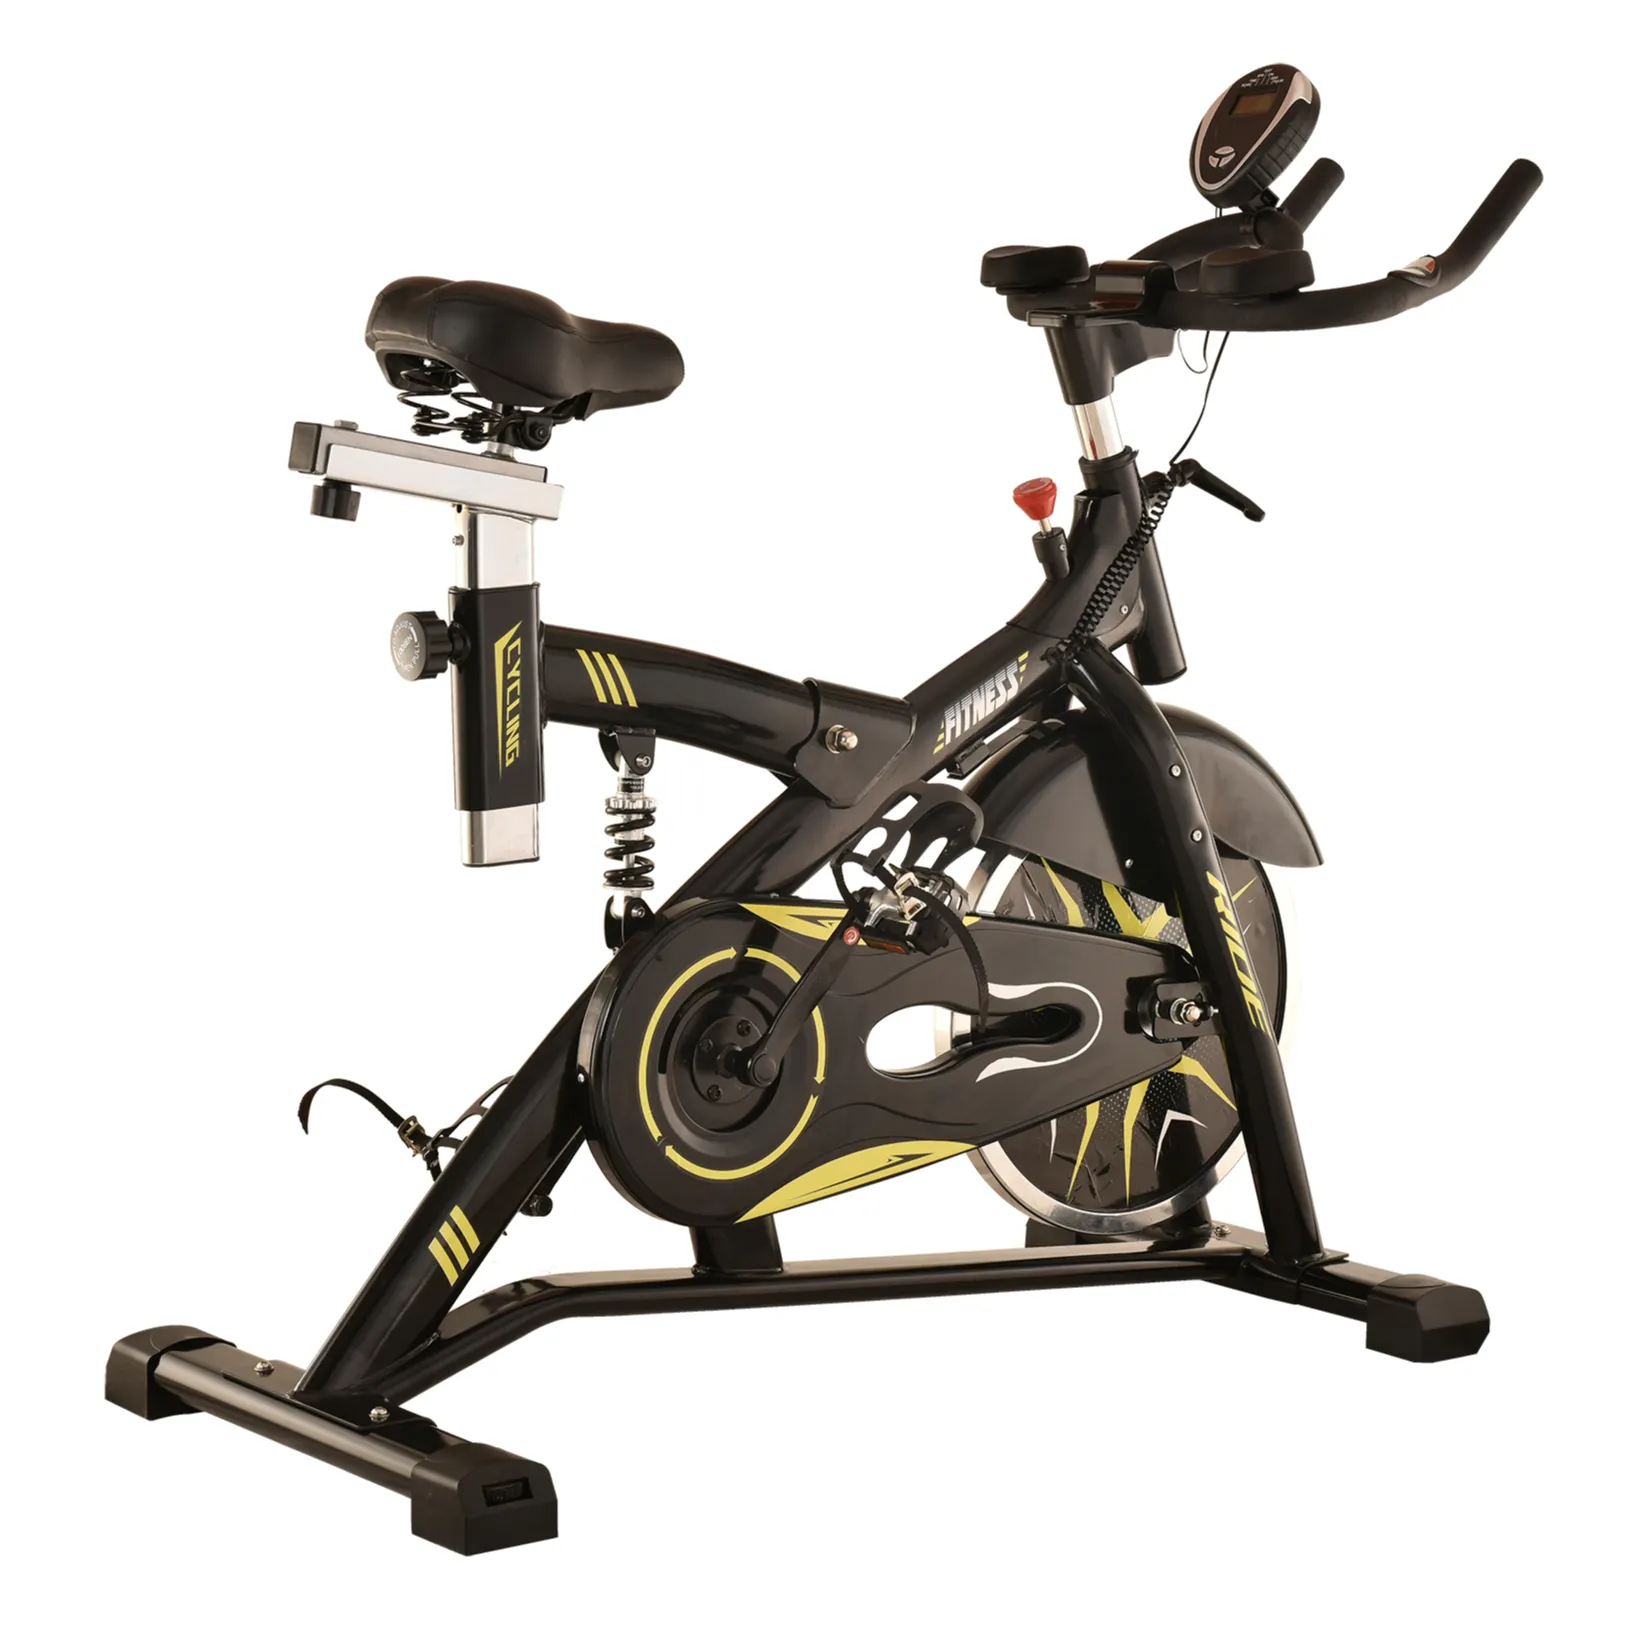 New Exercise Health Household Gym Spin Bike Magenetic Bike Cycling Fitness Training